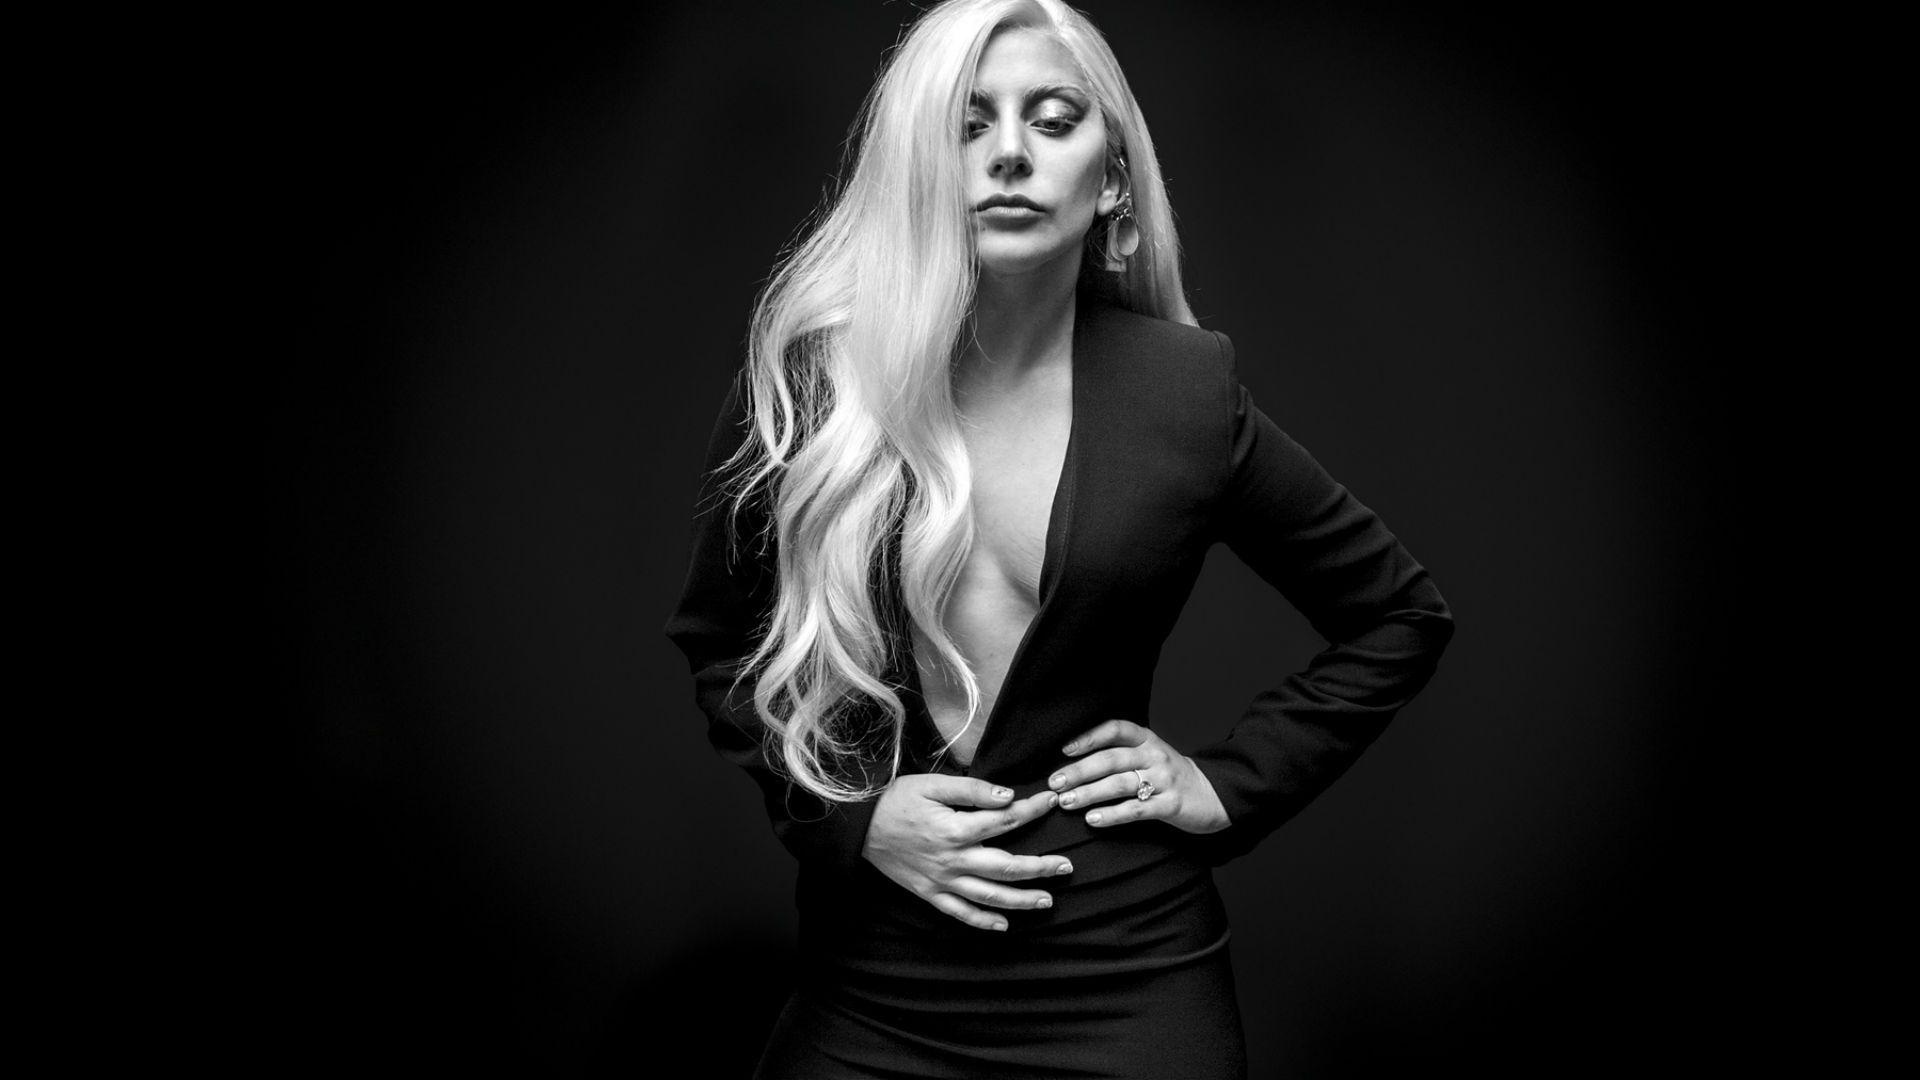 Lady Gaga: The first single, “Just Dance,” landed at number one on the Billboard Pop Songs chart. 1920x1080 Full HD Wallpaper.